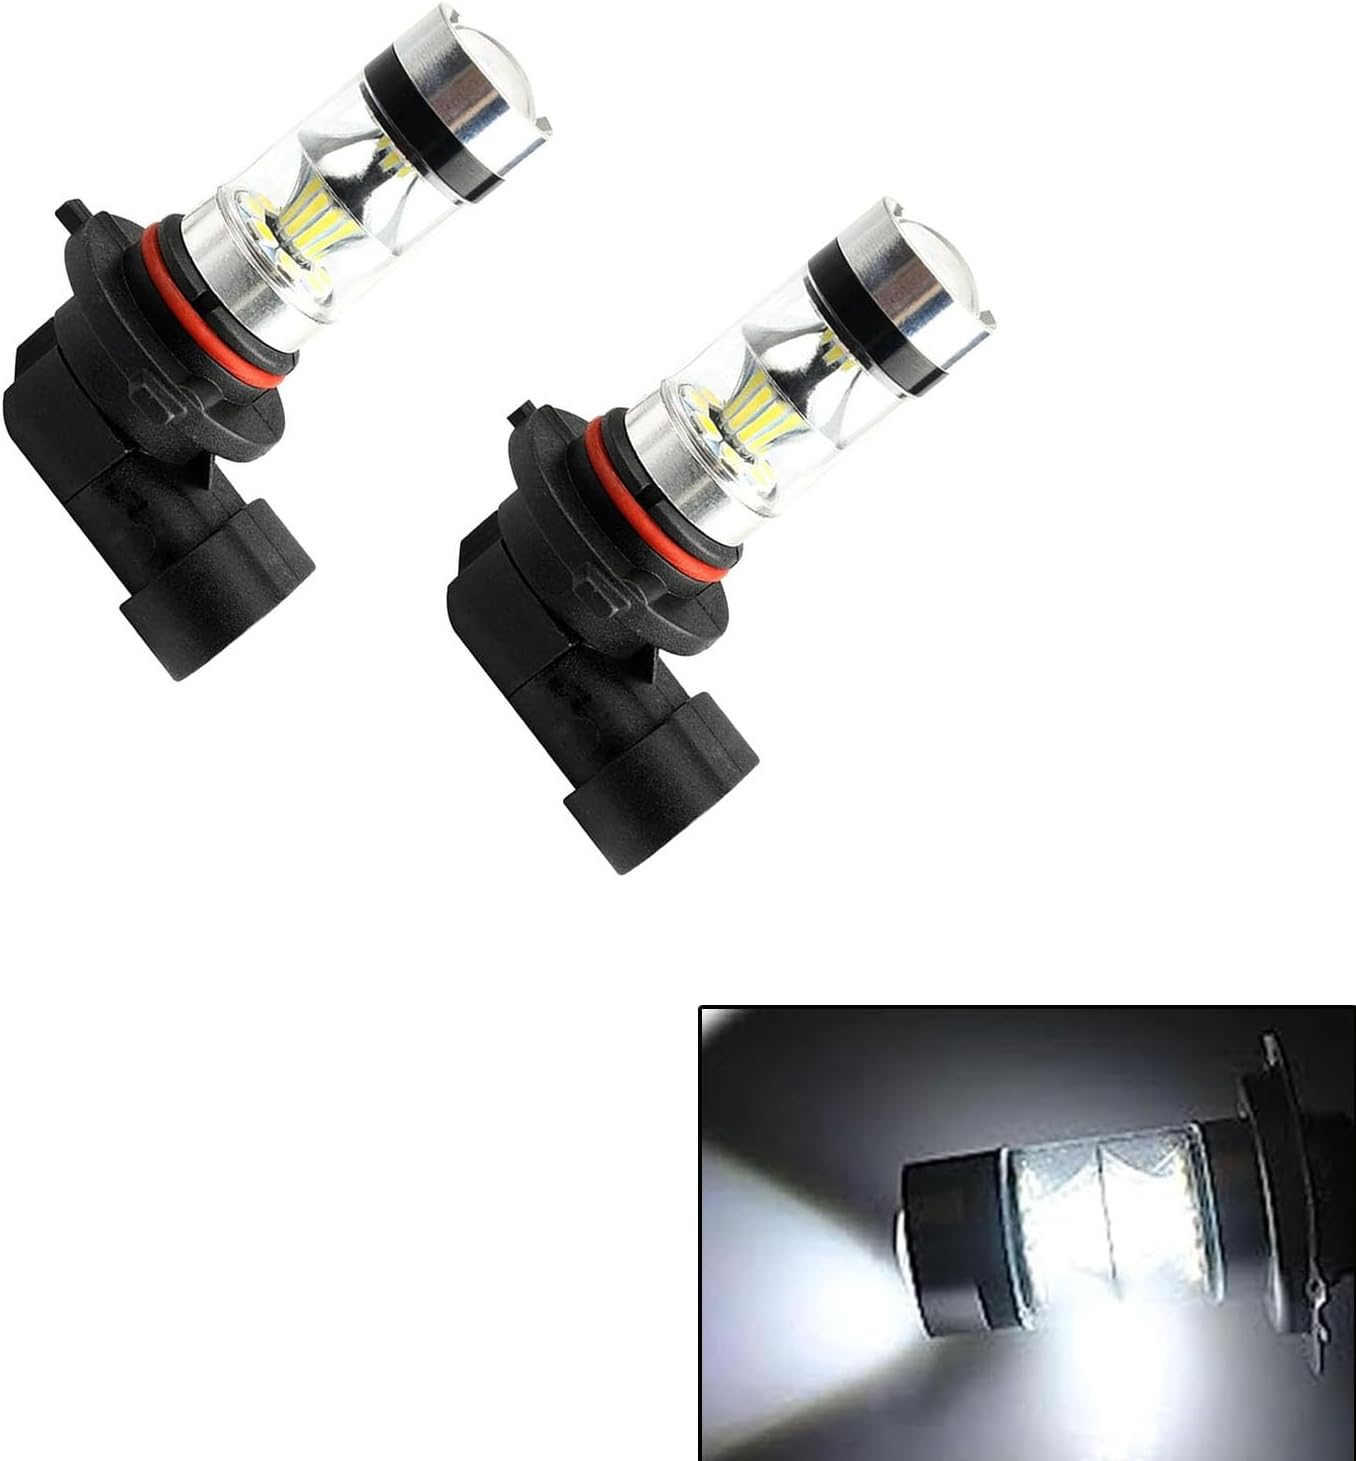 2 PCS H8/H11 Car LED Low Beam, 17.5mm x 83mm DC 12V 2828-20SMD 100W High Power 7500K-8500K Fog Light Bulb, Universal Lighting Replacement Accessories, Suitable for Most Car Models (White)